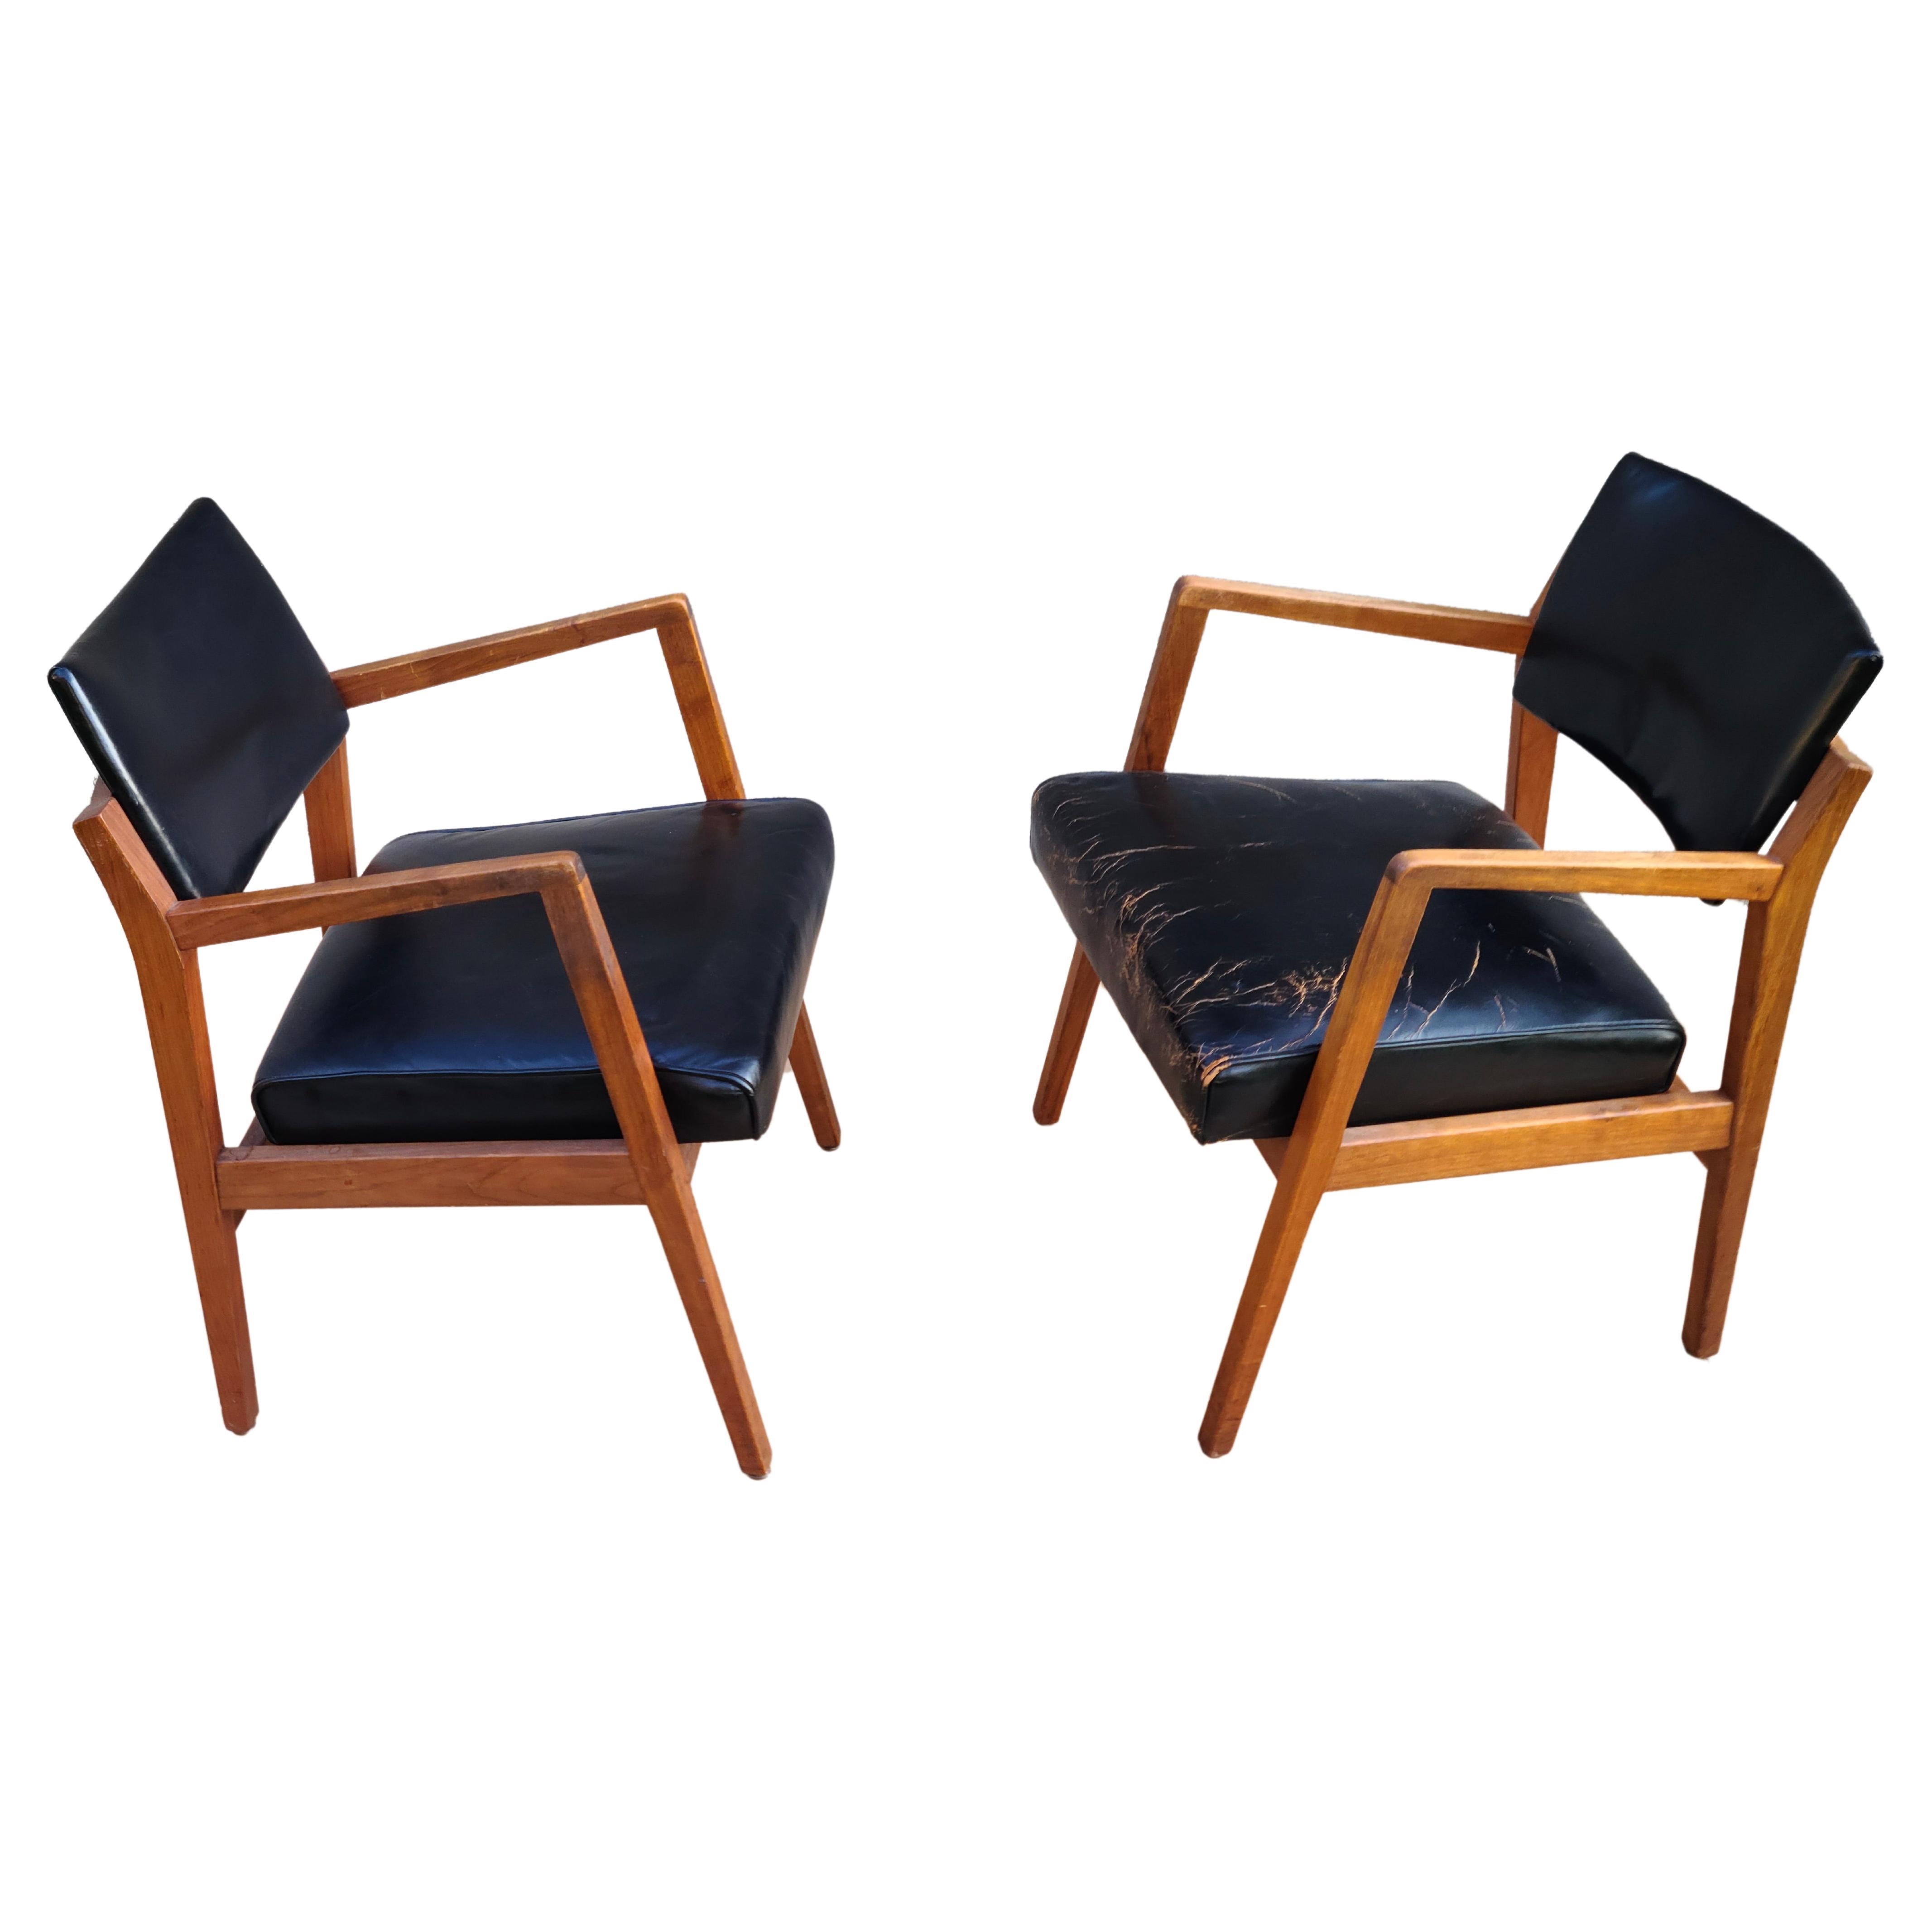 Set of 2 Arm Chairs by Jens Risom.
Walnut Frames. Vintage Leather seat and backrest.

